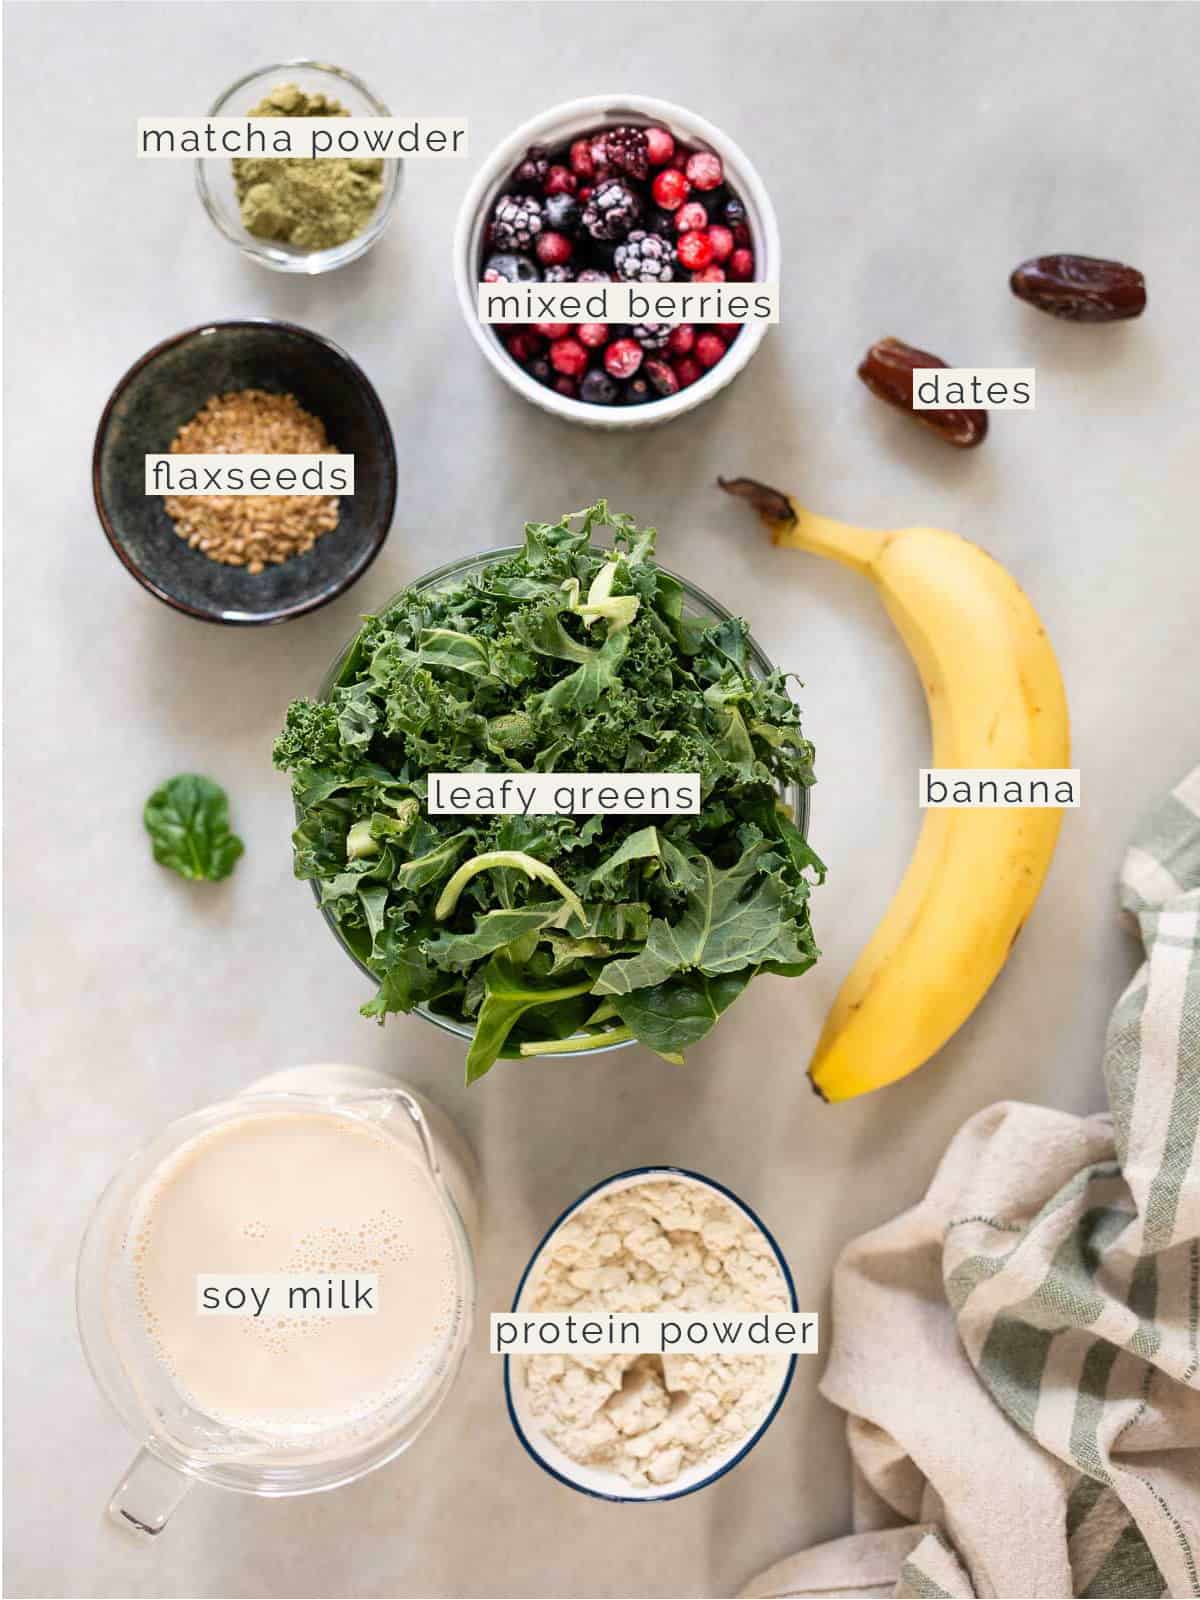 labeled ingredients needed to make the green smoothie.